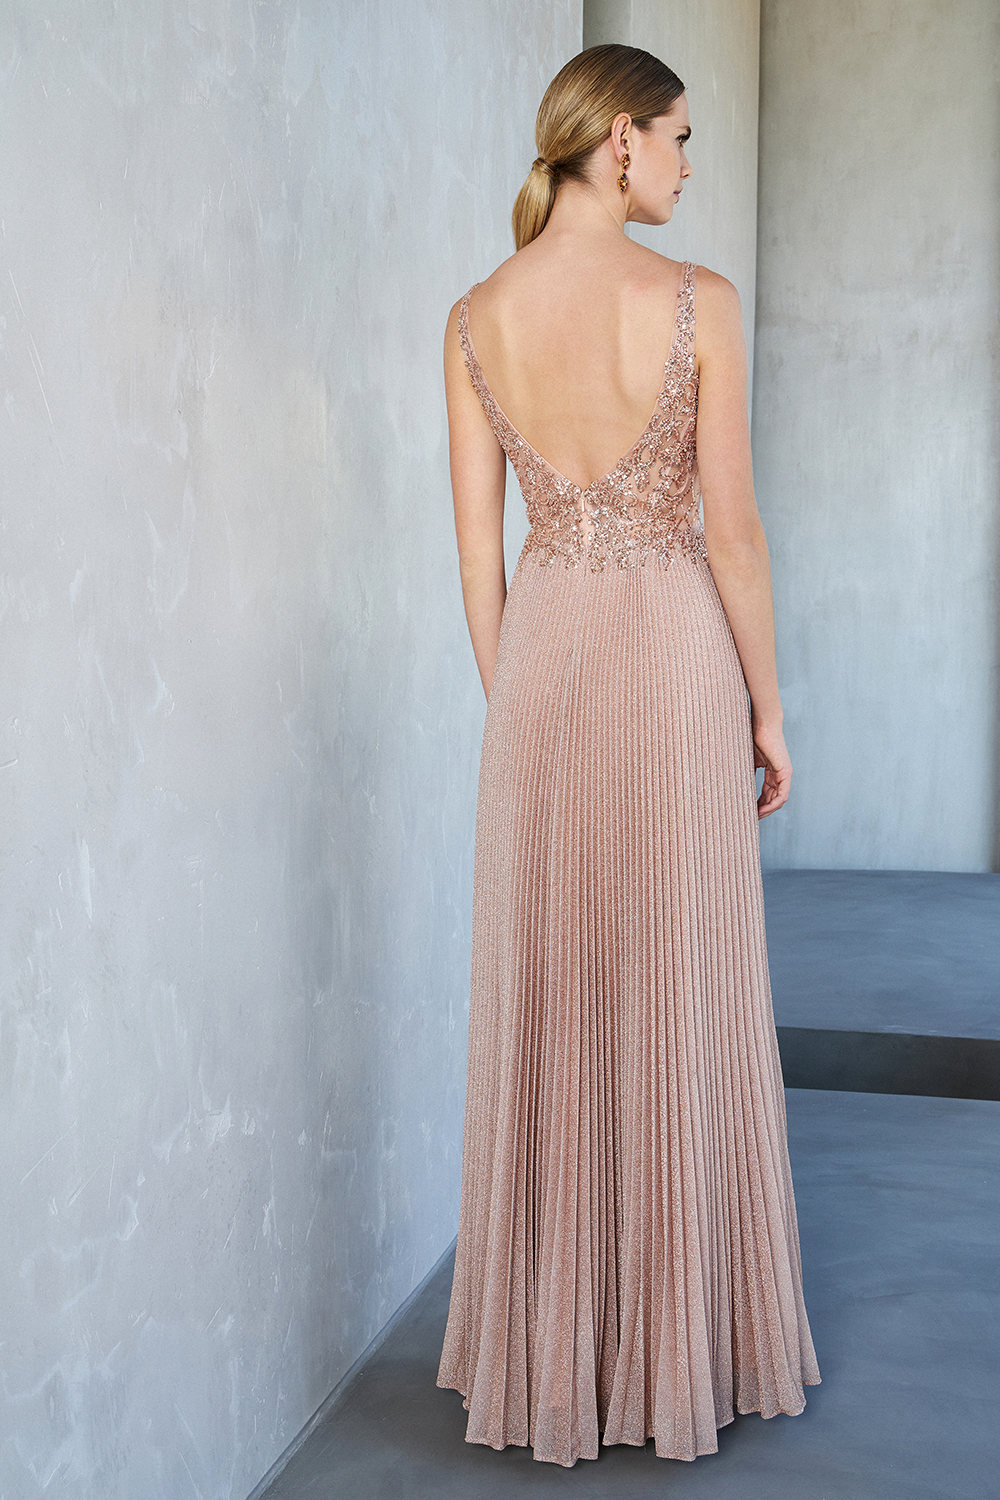 Long evening pleated dress with shining fabric and beaded top